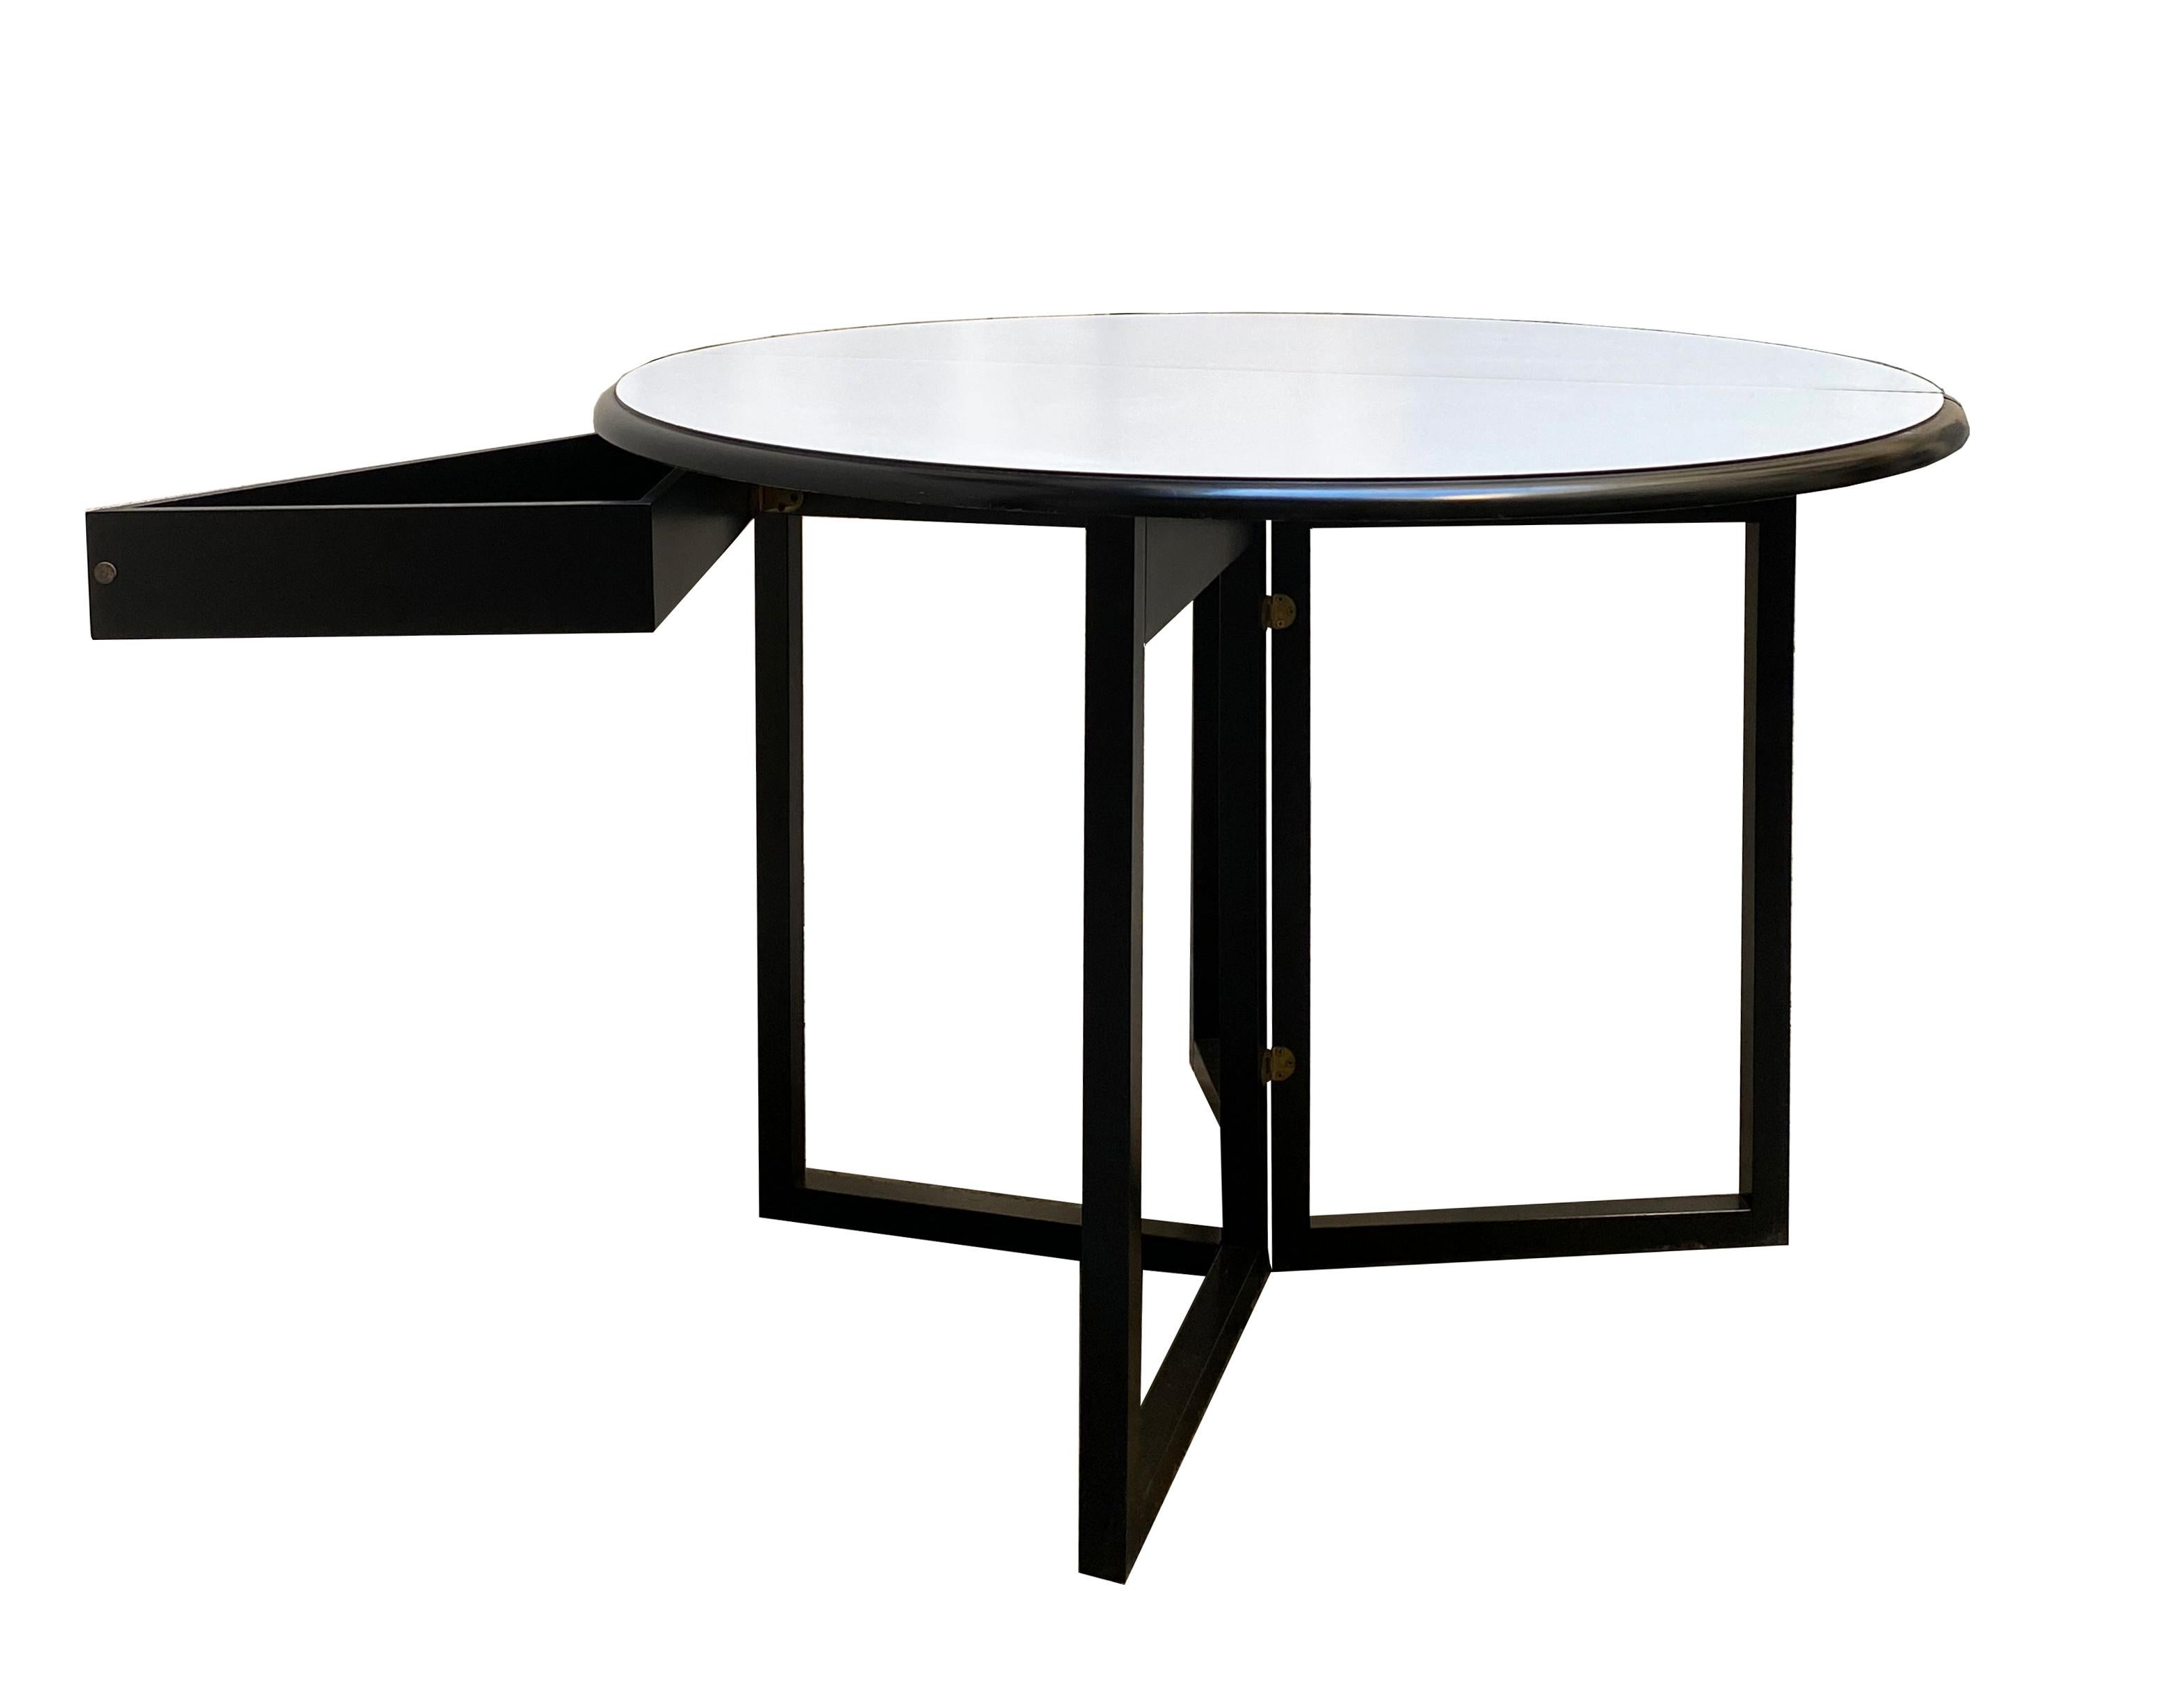 Late 20th Century Kazuide Takahama Style Lacquered Wood Folding Round Table, Italy 1970s For Sale